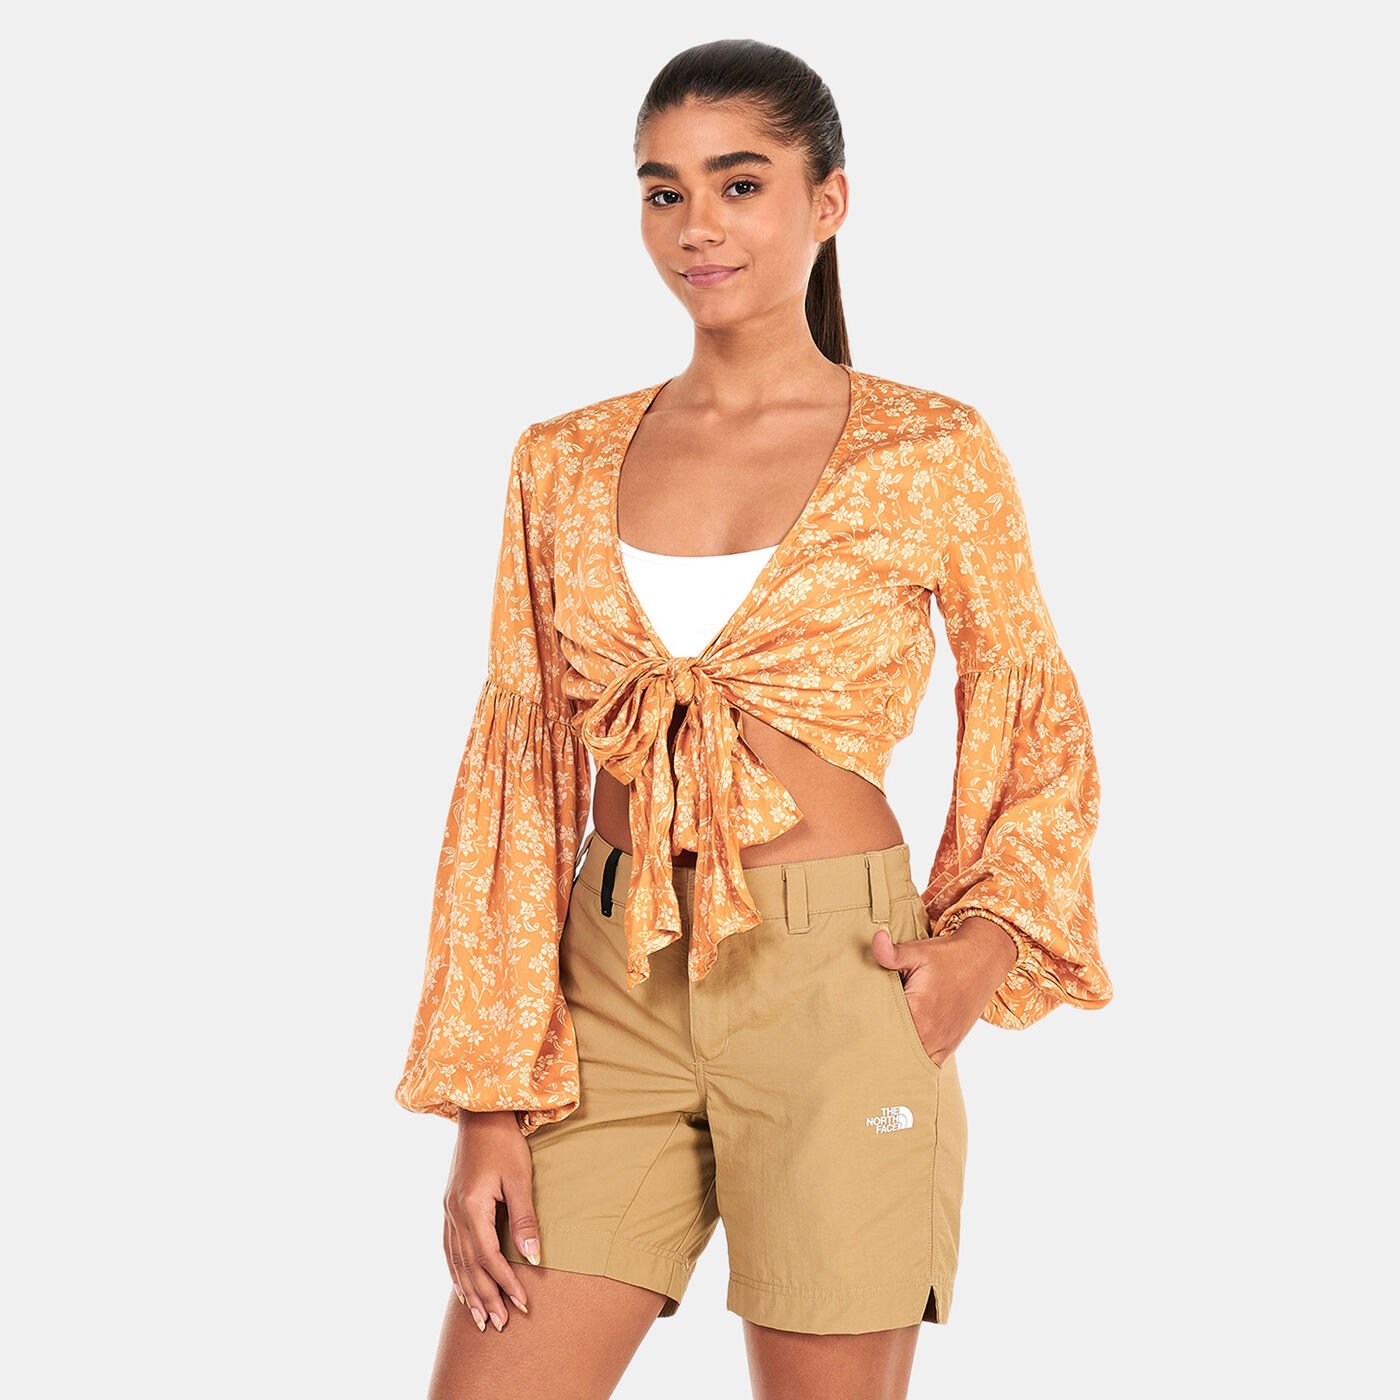 Women's Blossom Gold-Dust Top